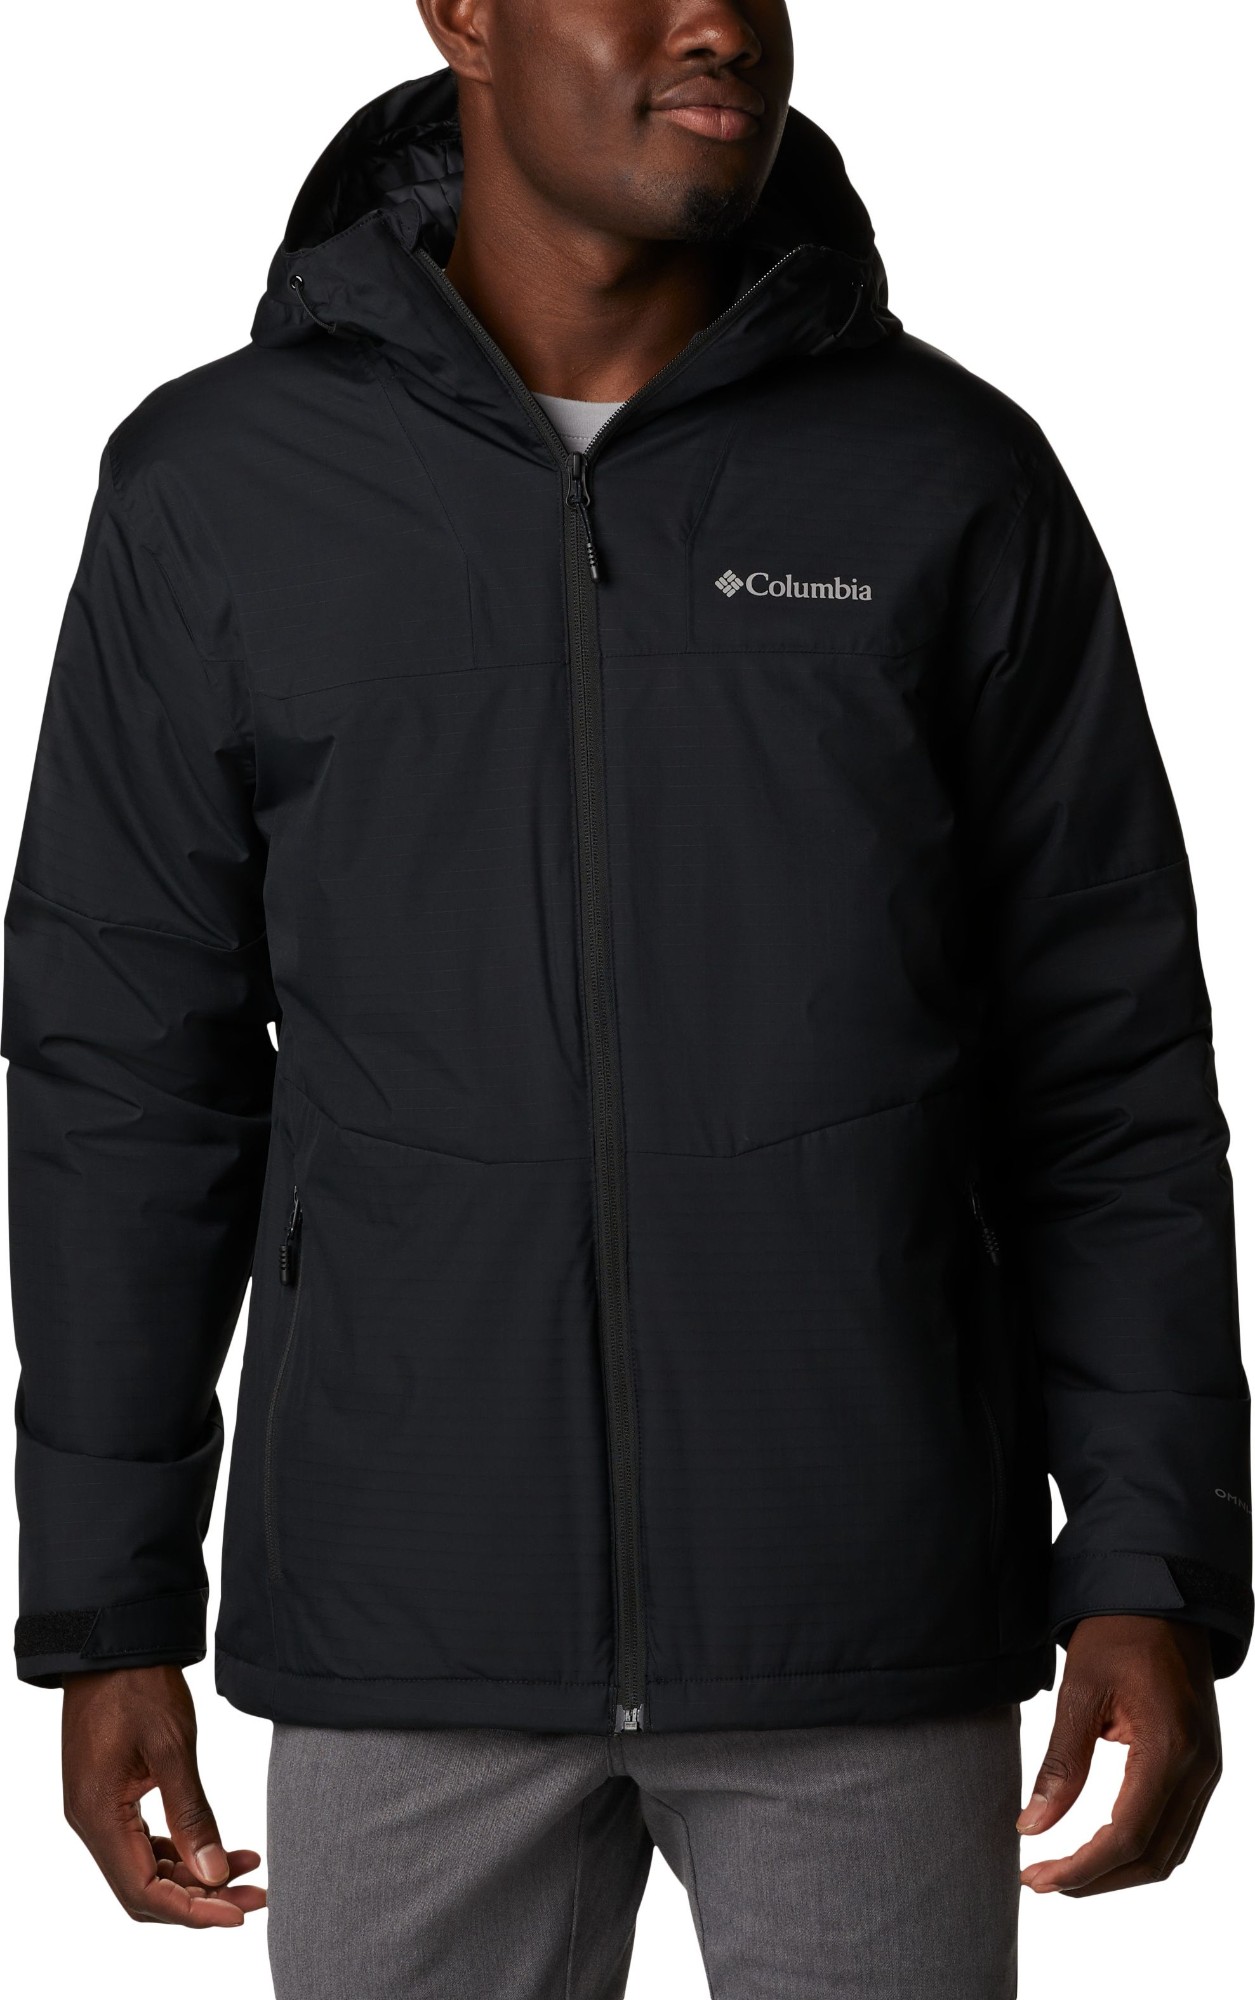 Columbia Point Park Insulated Jacket Men's Black L